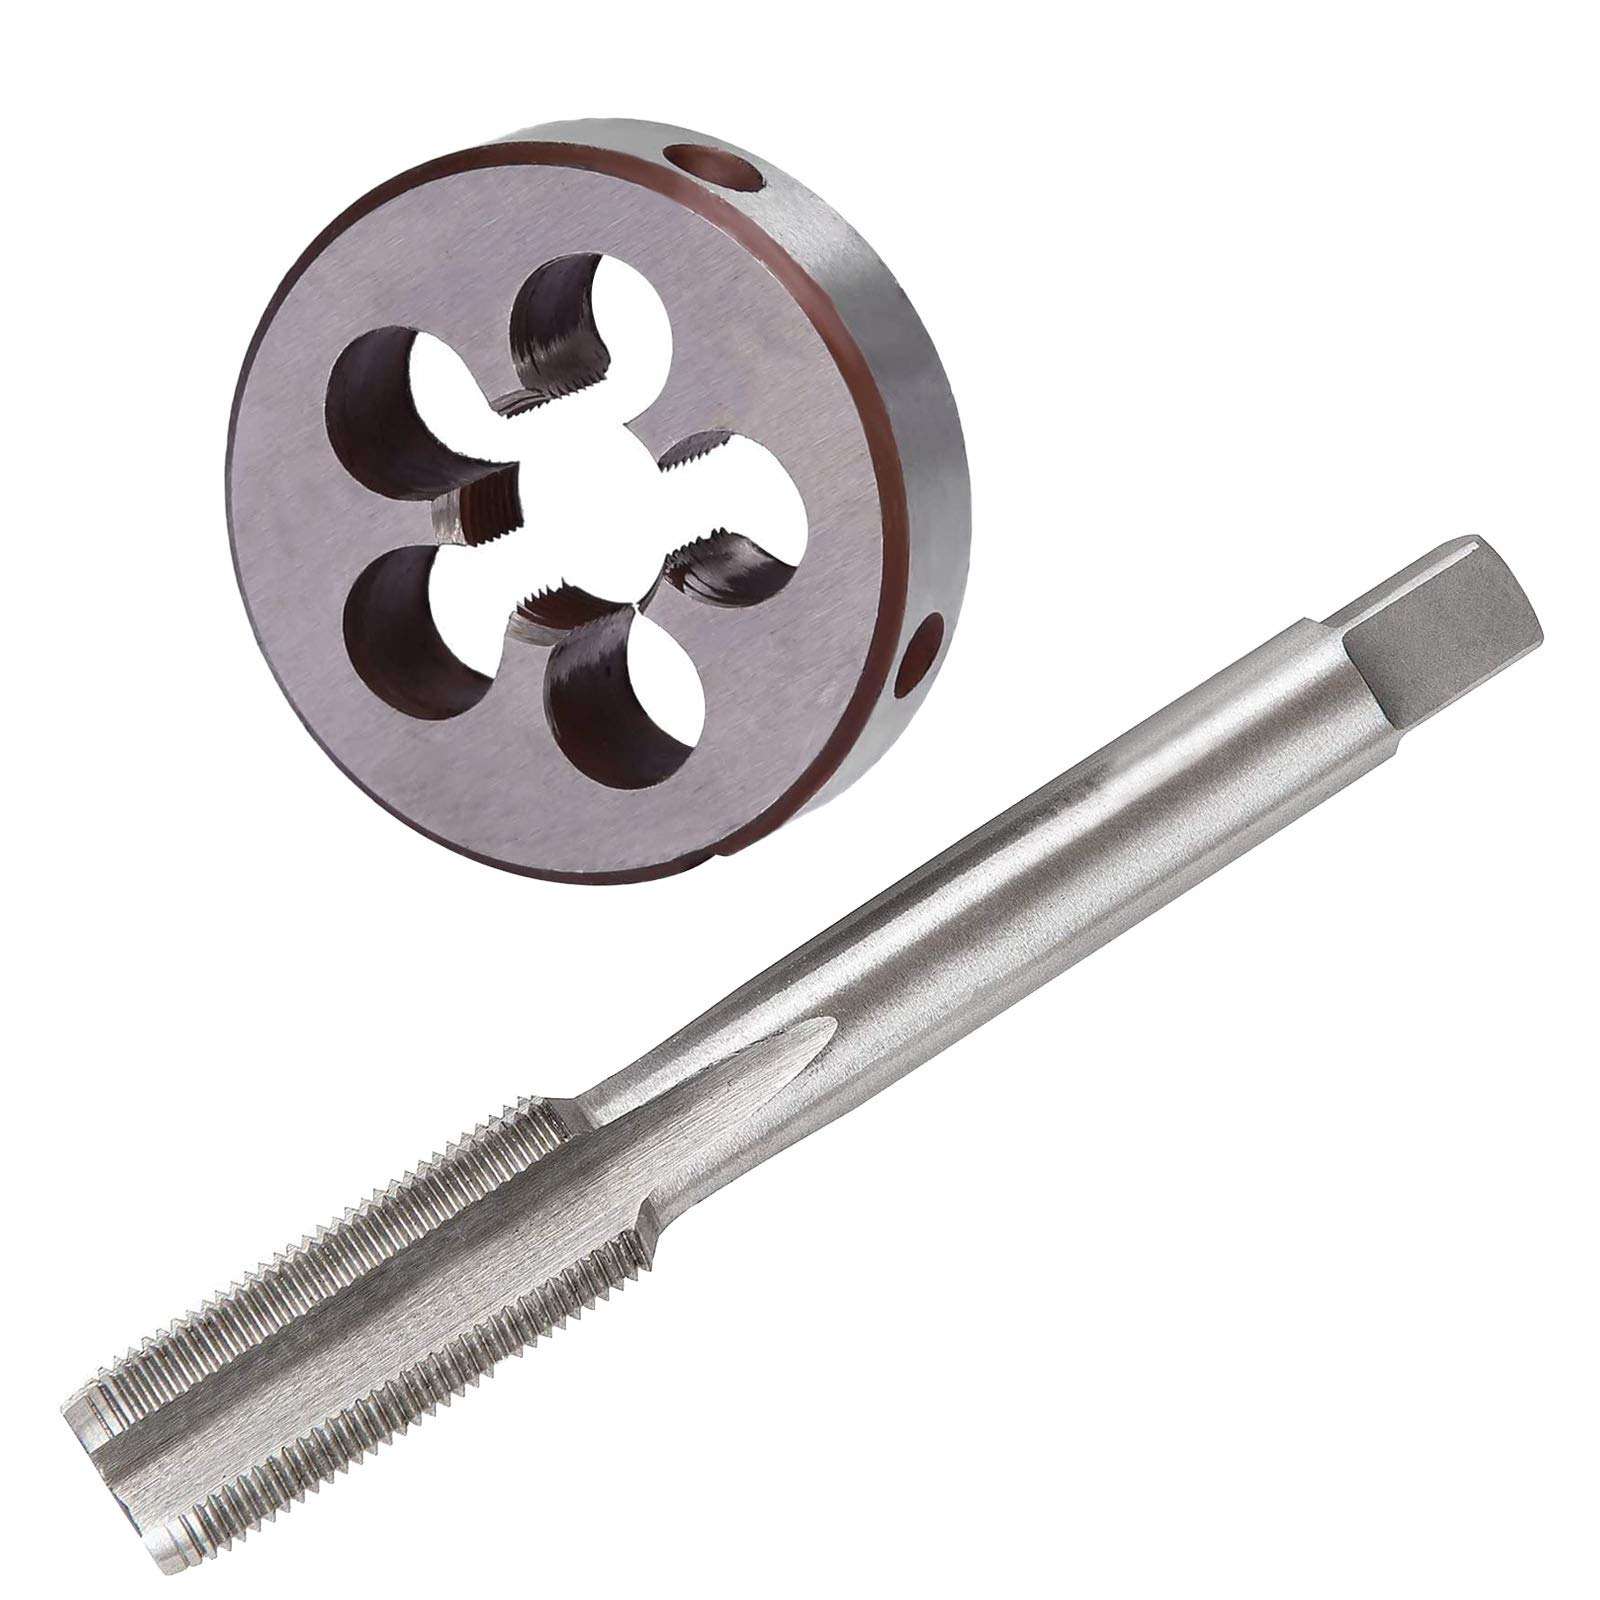 M14 x 1.25mm HSS Metric Tap And Die Set Thread Tap And Round Thread Die Right Hand HSS Taper Silver Tone (2Pcs)